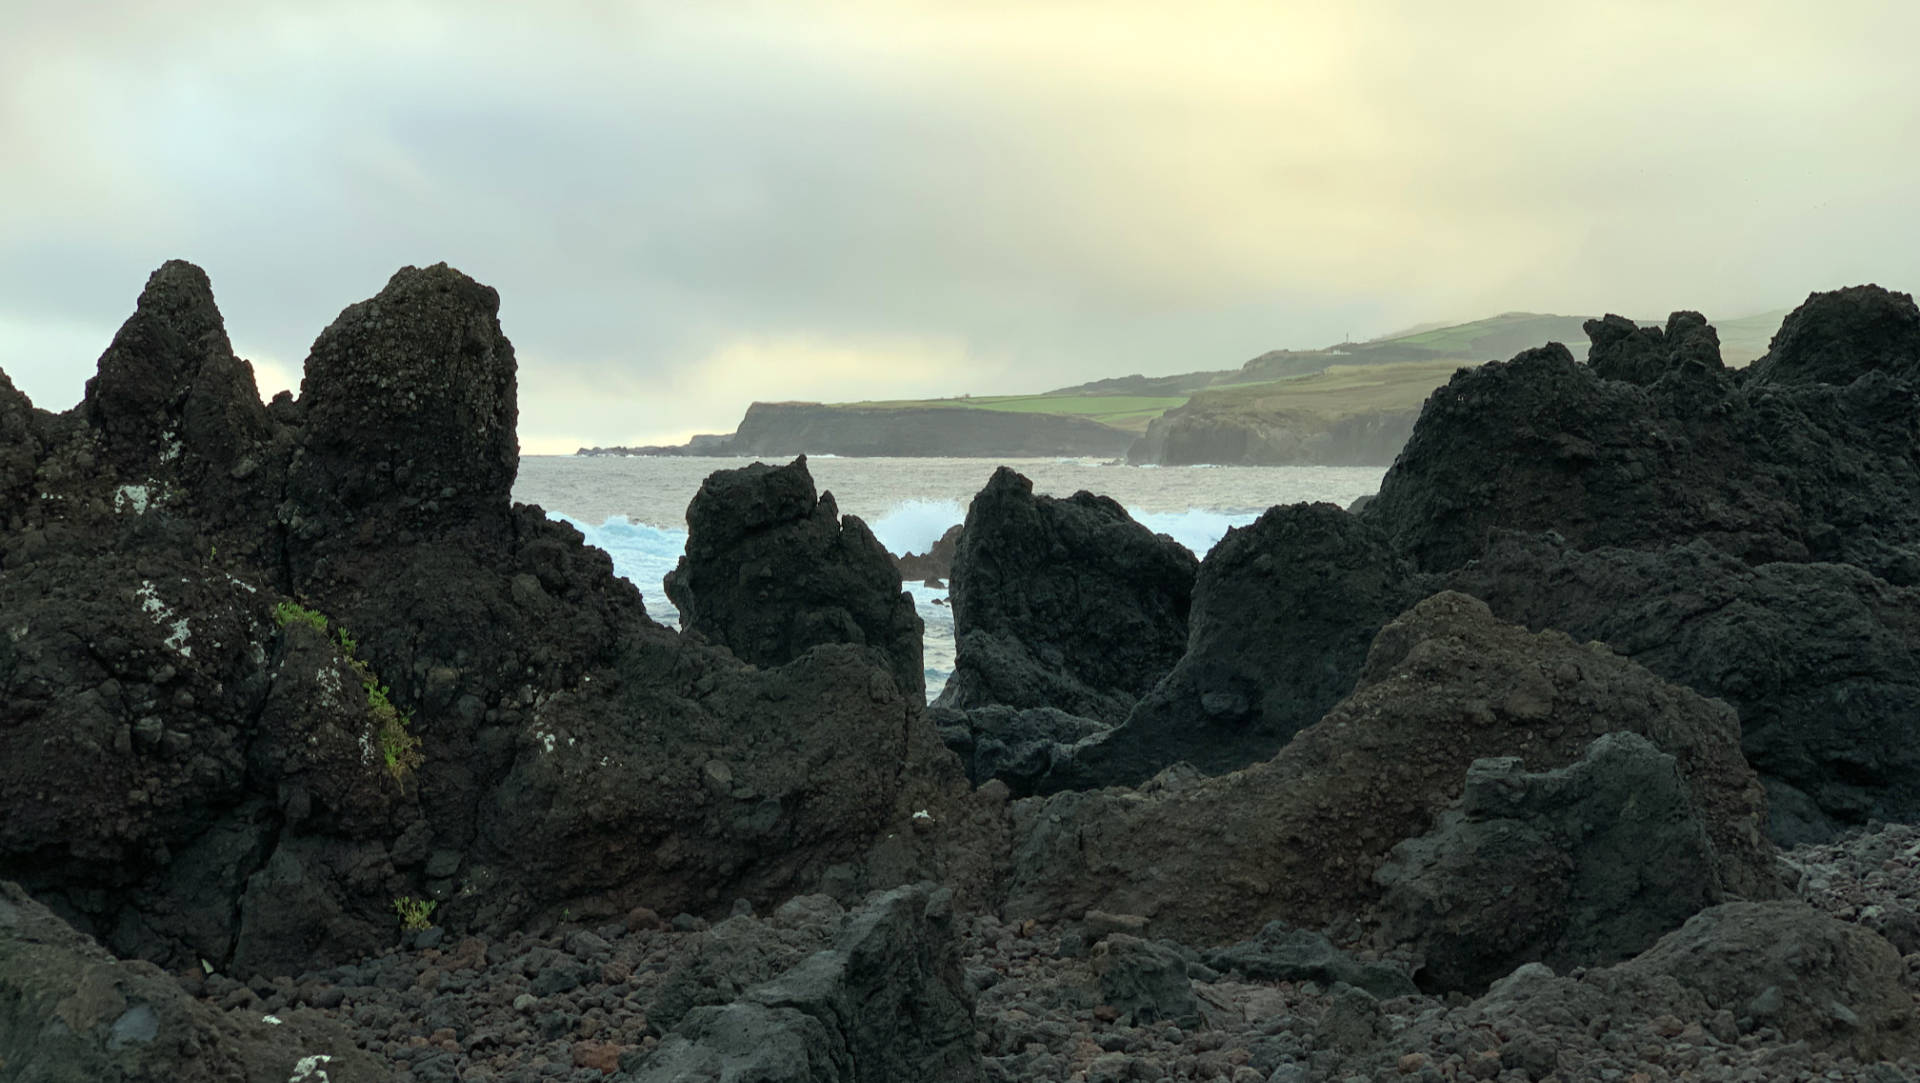 Just a little taste of Terceira as the sunrise hit the volcanic rockslide we reached with our early morning car rental!